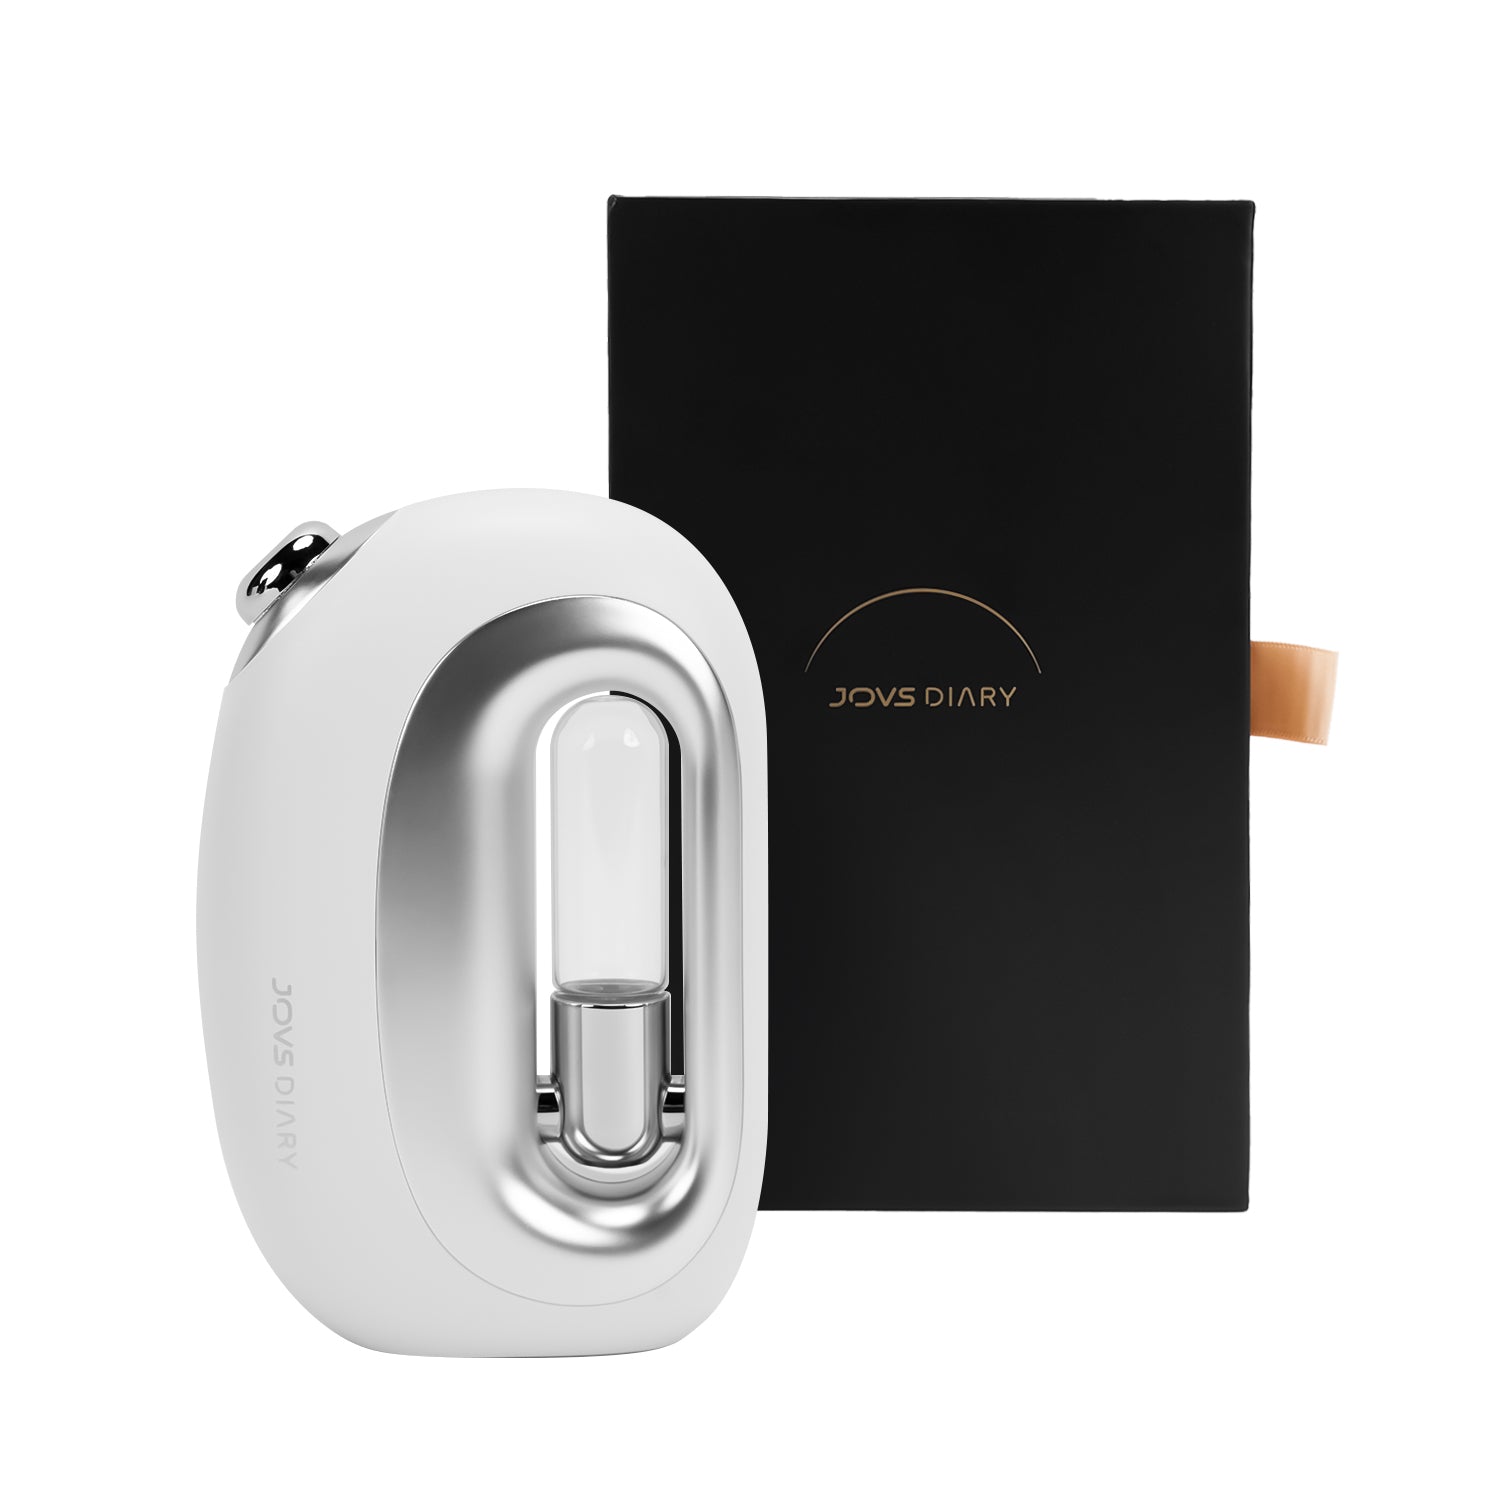 JOVS Diary Custom Hydrator in Sleek White, Modern Skincare Technology with a Touch of Luxury.